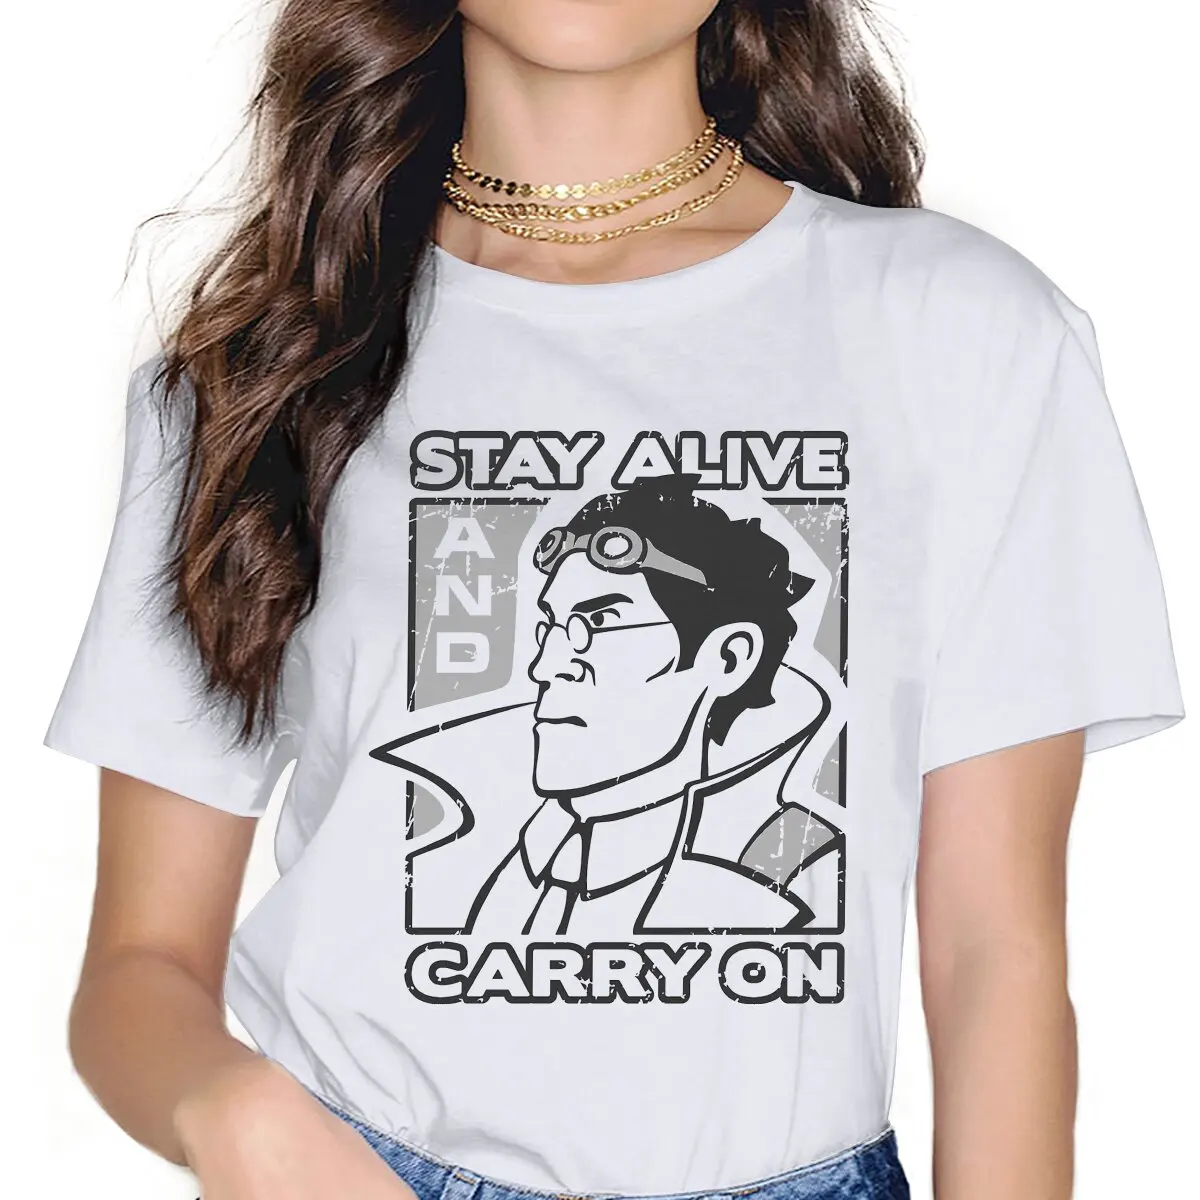 Women s Stay Alive T Shirt Team Fortress 2 Shooter Game Clothing Novelty Short Sleeve Crew - Team Fortress 2 Merch